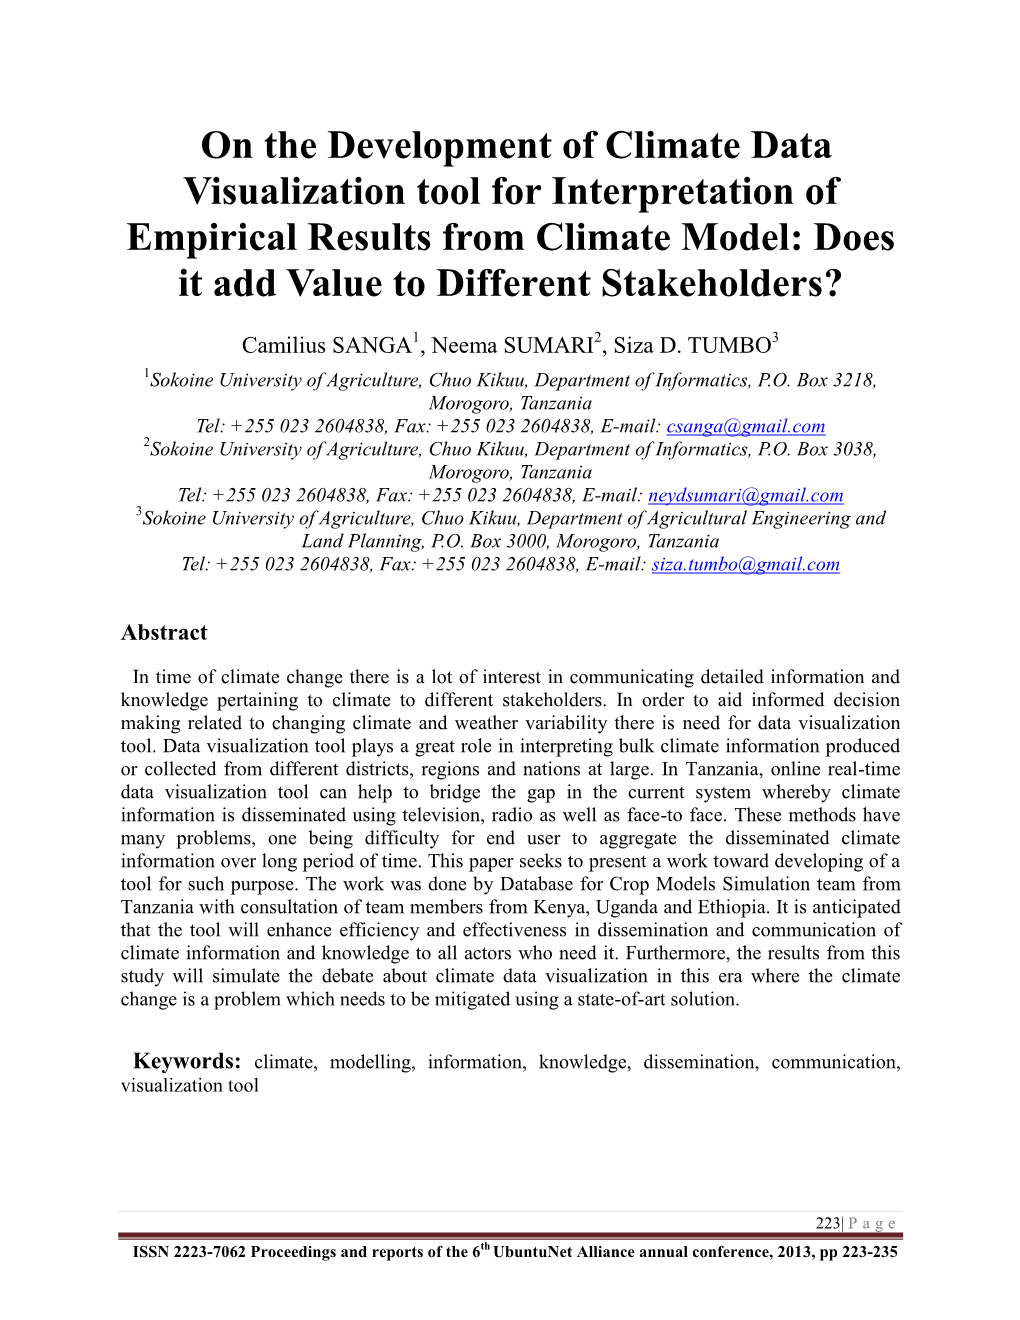 On the Development of Climate Data Visualization Tool for Interpretation of Empirical Results from Climate Model: Does It Add Value to Different Stakeholders?